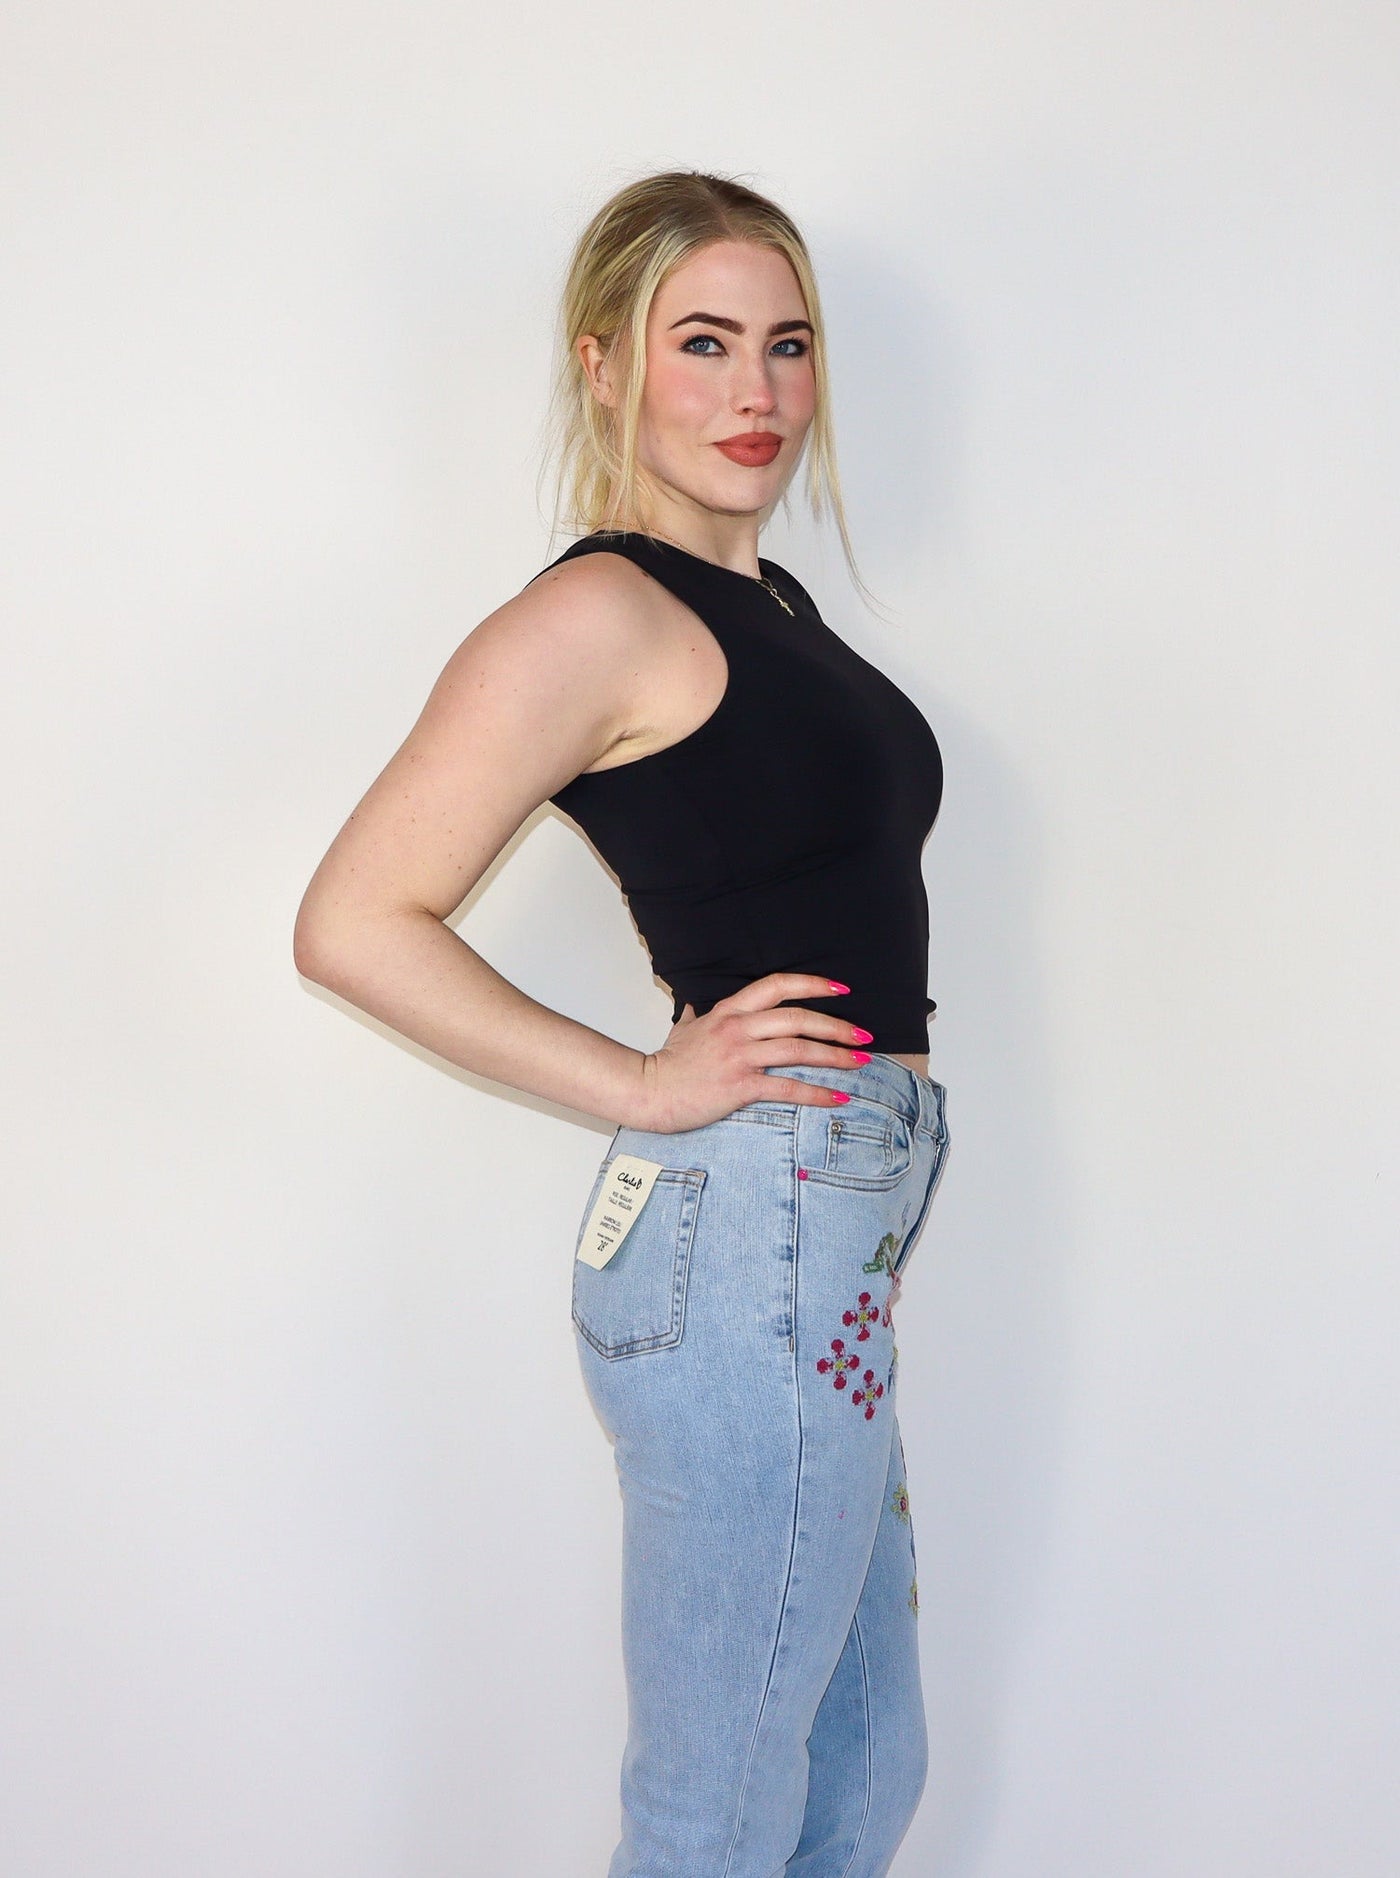 Model is wearing a fitted black crew neck tank top. Top is paired with blue jeans.